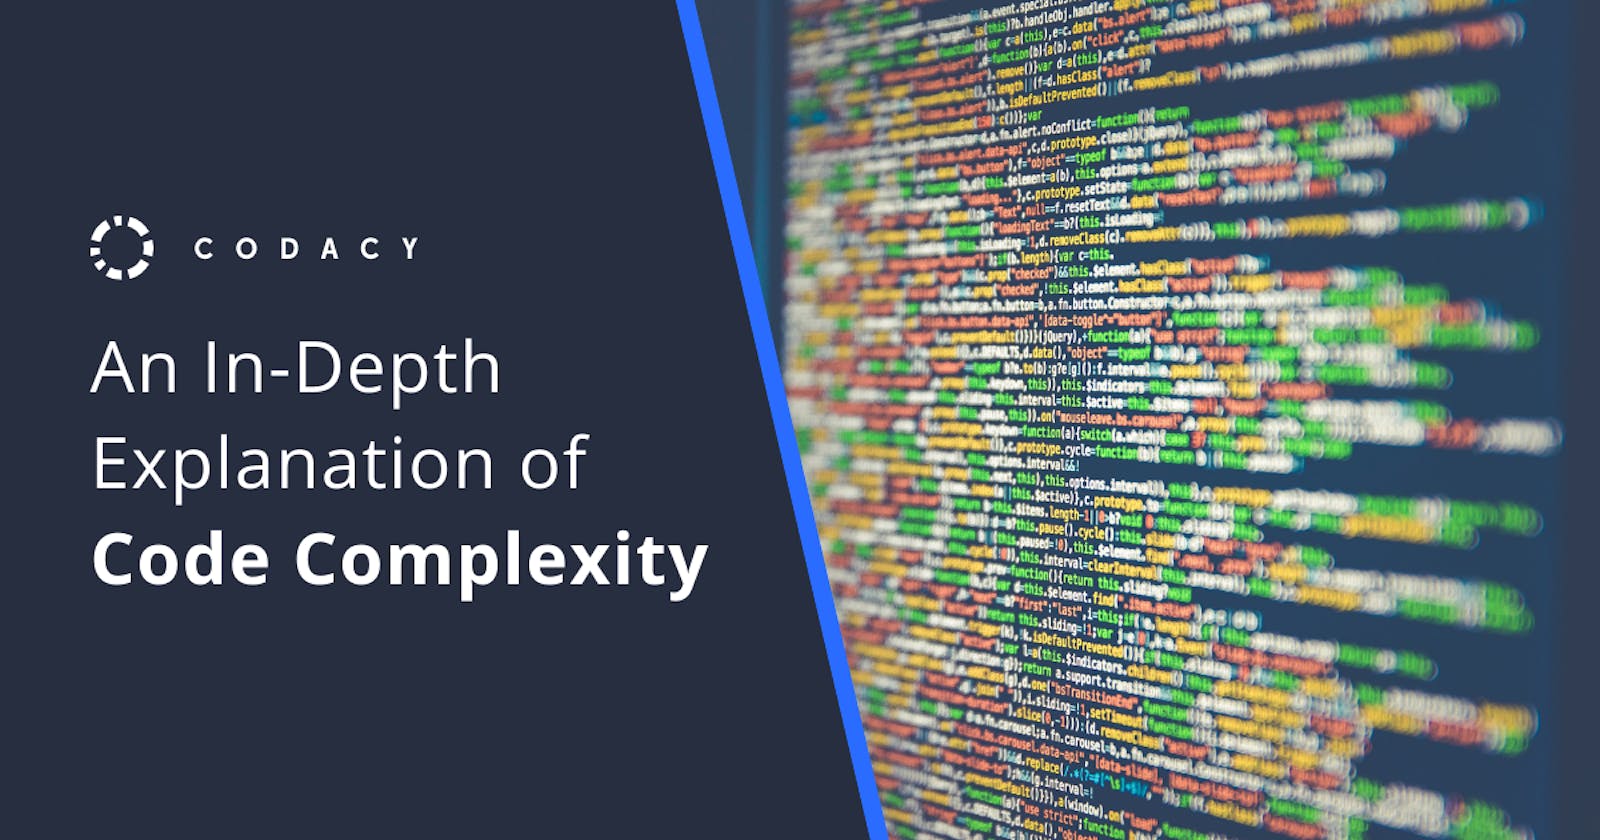 An In-Depth Explanation of Code Complexity